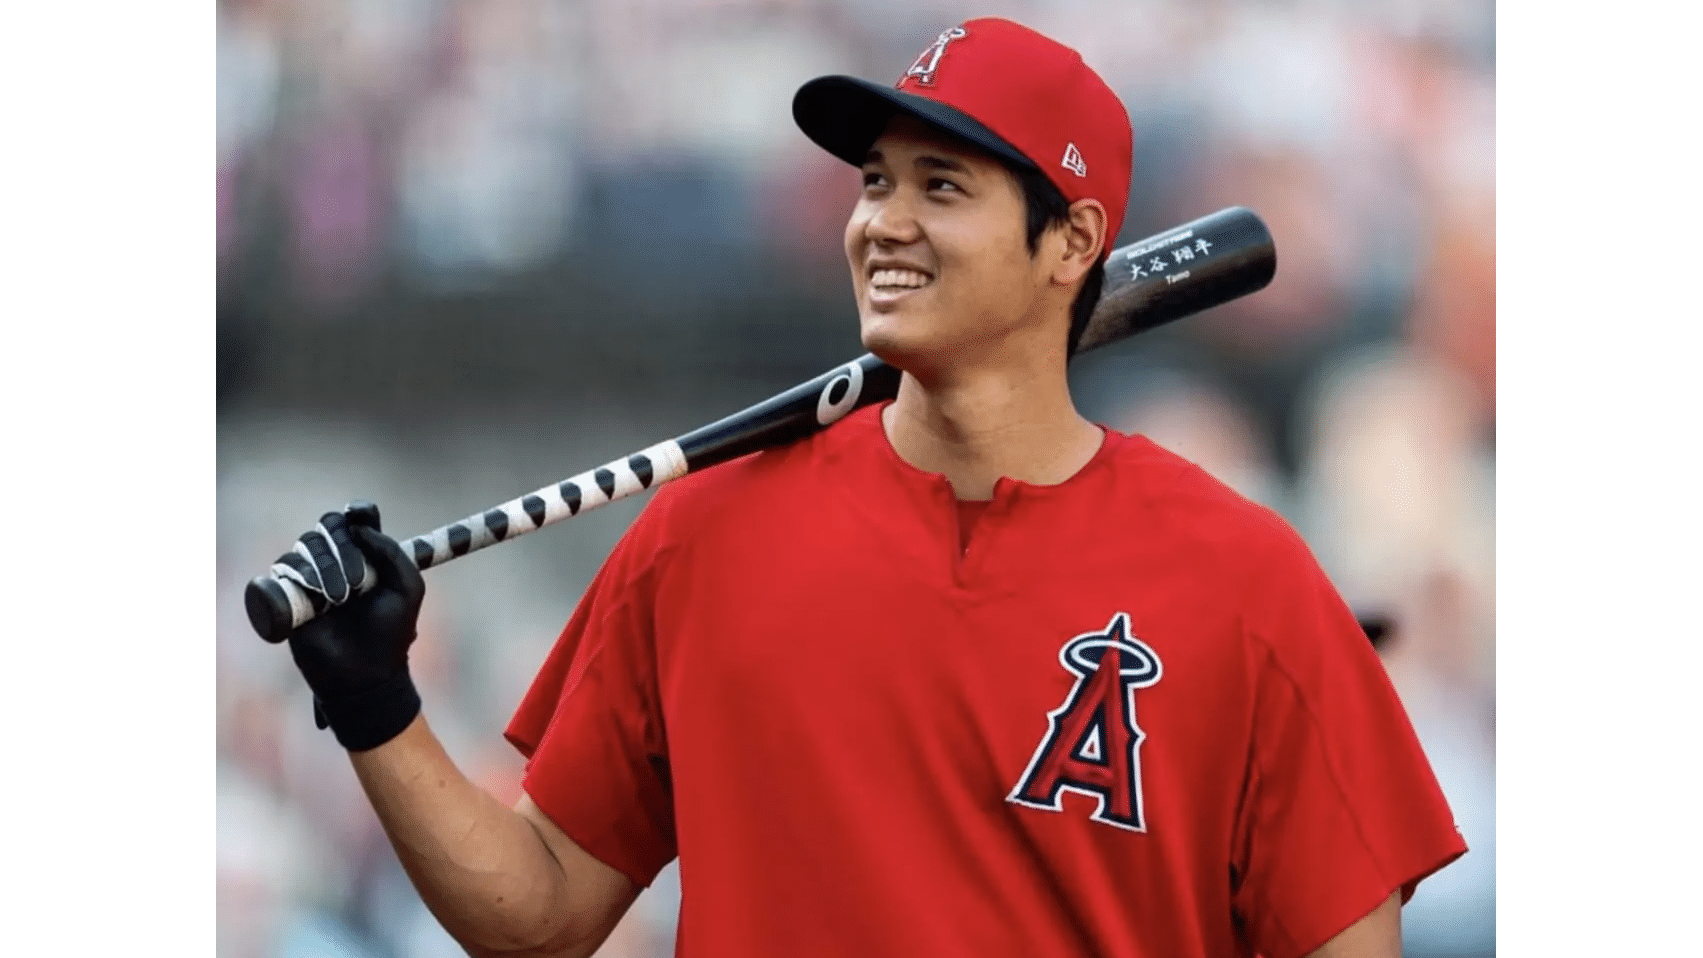 I’m not offended: Shohei Ohtani reacts to Jack Morris’ controversial remarks